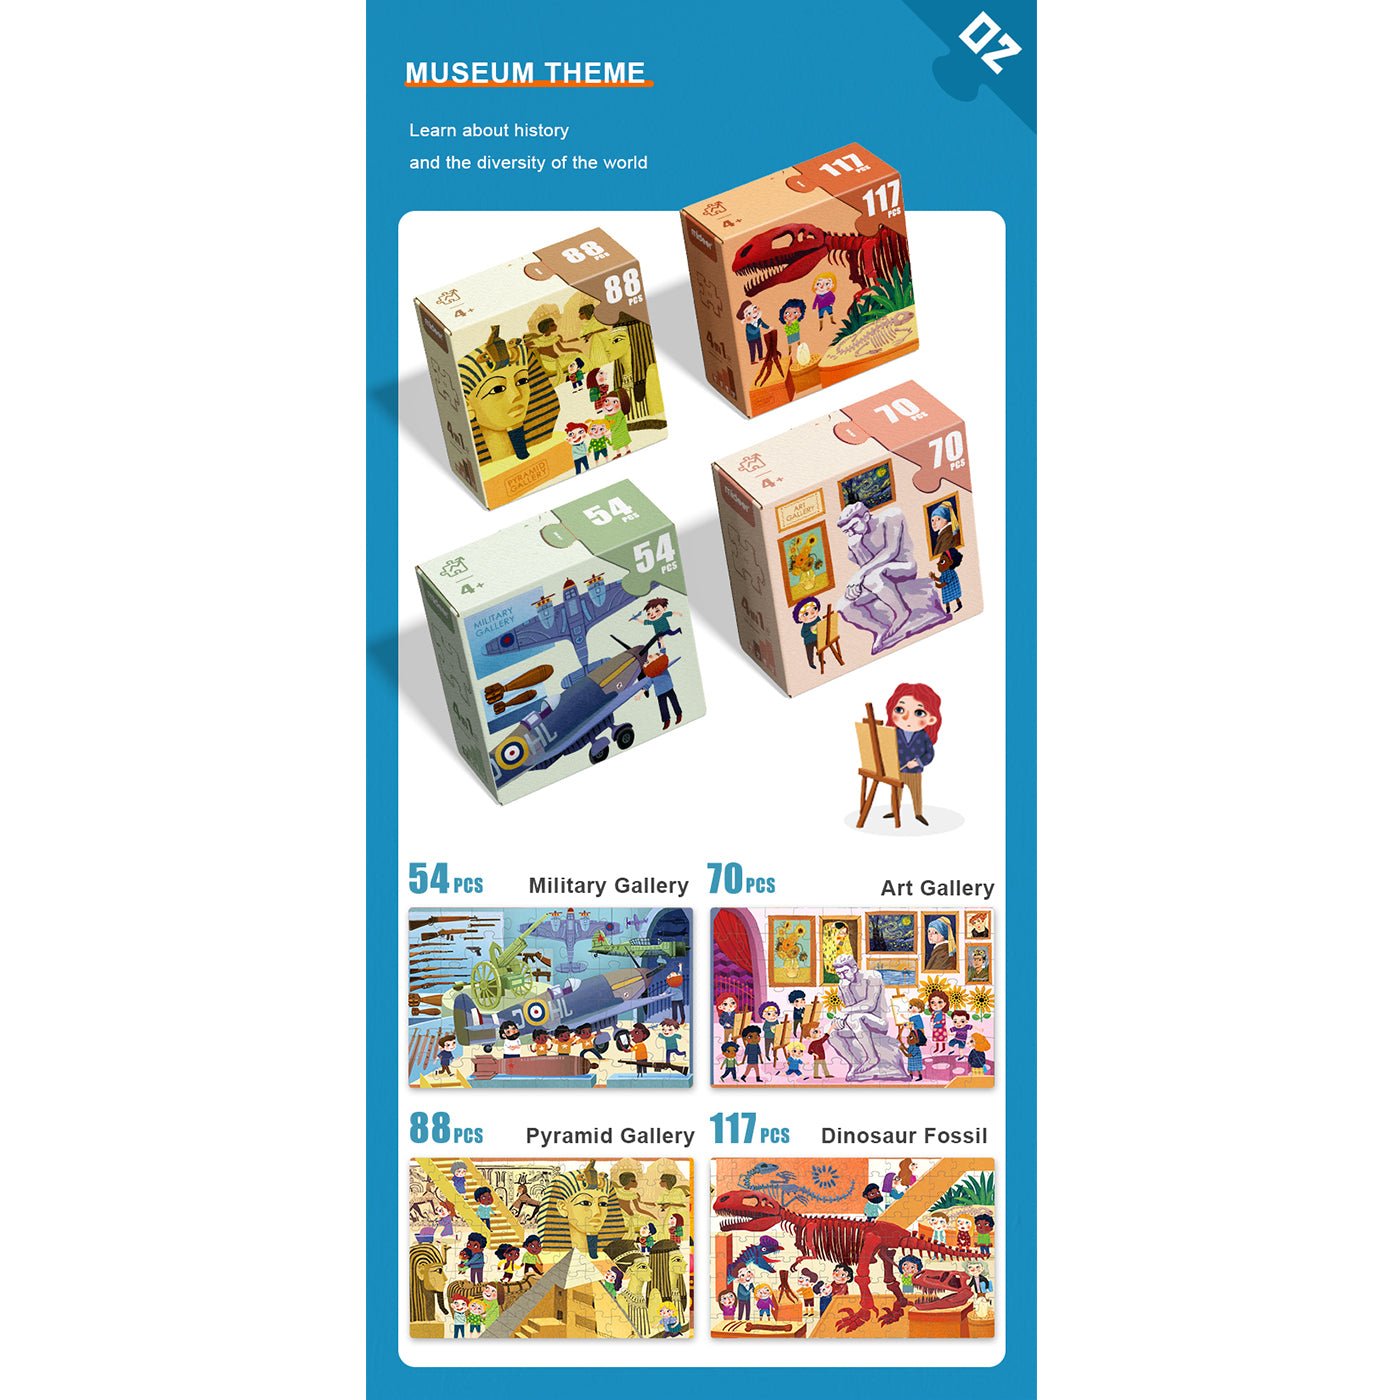 4 In 1 My Visit To The Museum Puzzle Set 329pcs - 0cm